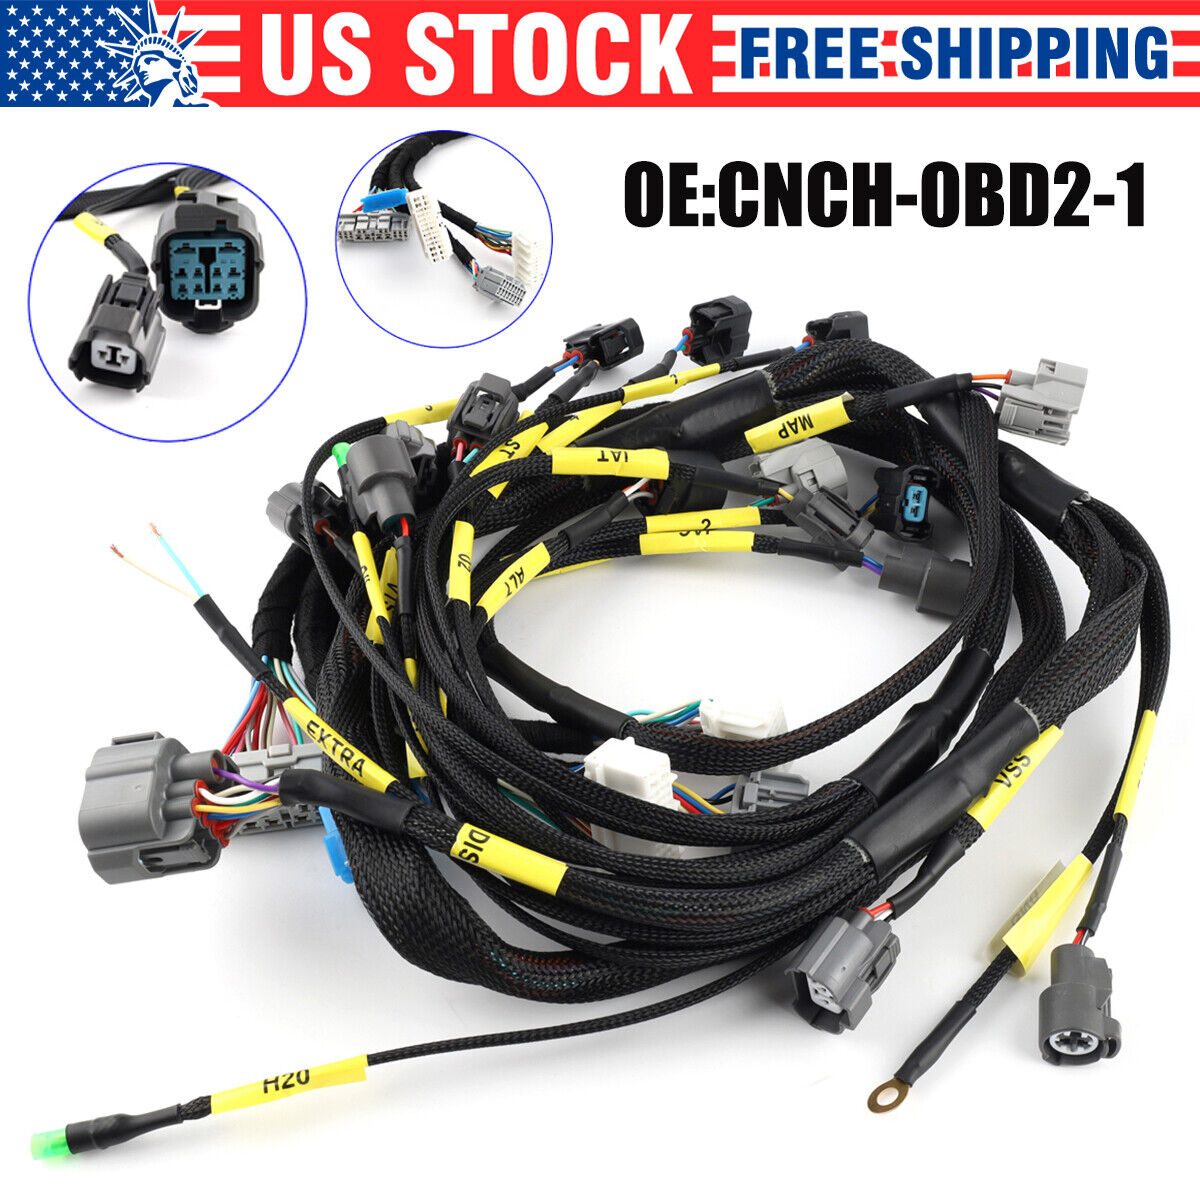 Tucked Engine Wire Harness For 1992-2000 Honda Civic Integra OBD2 D & B-series .